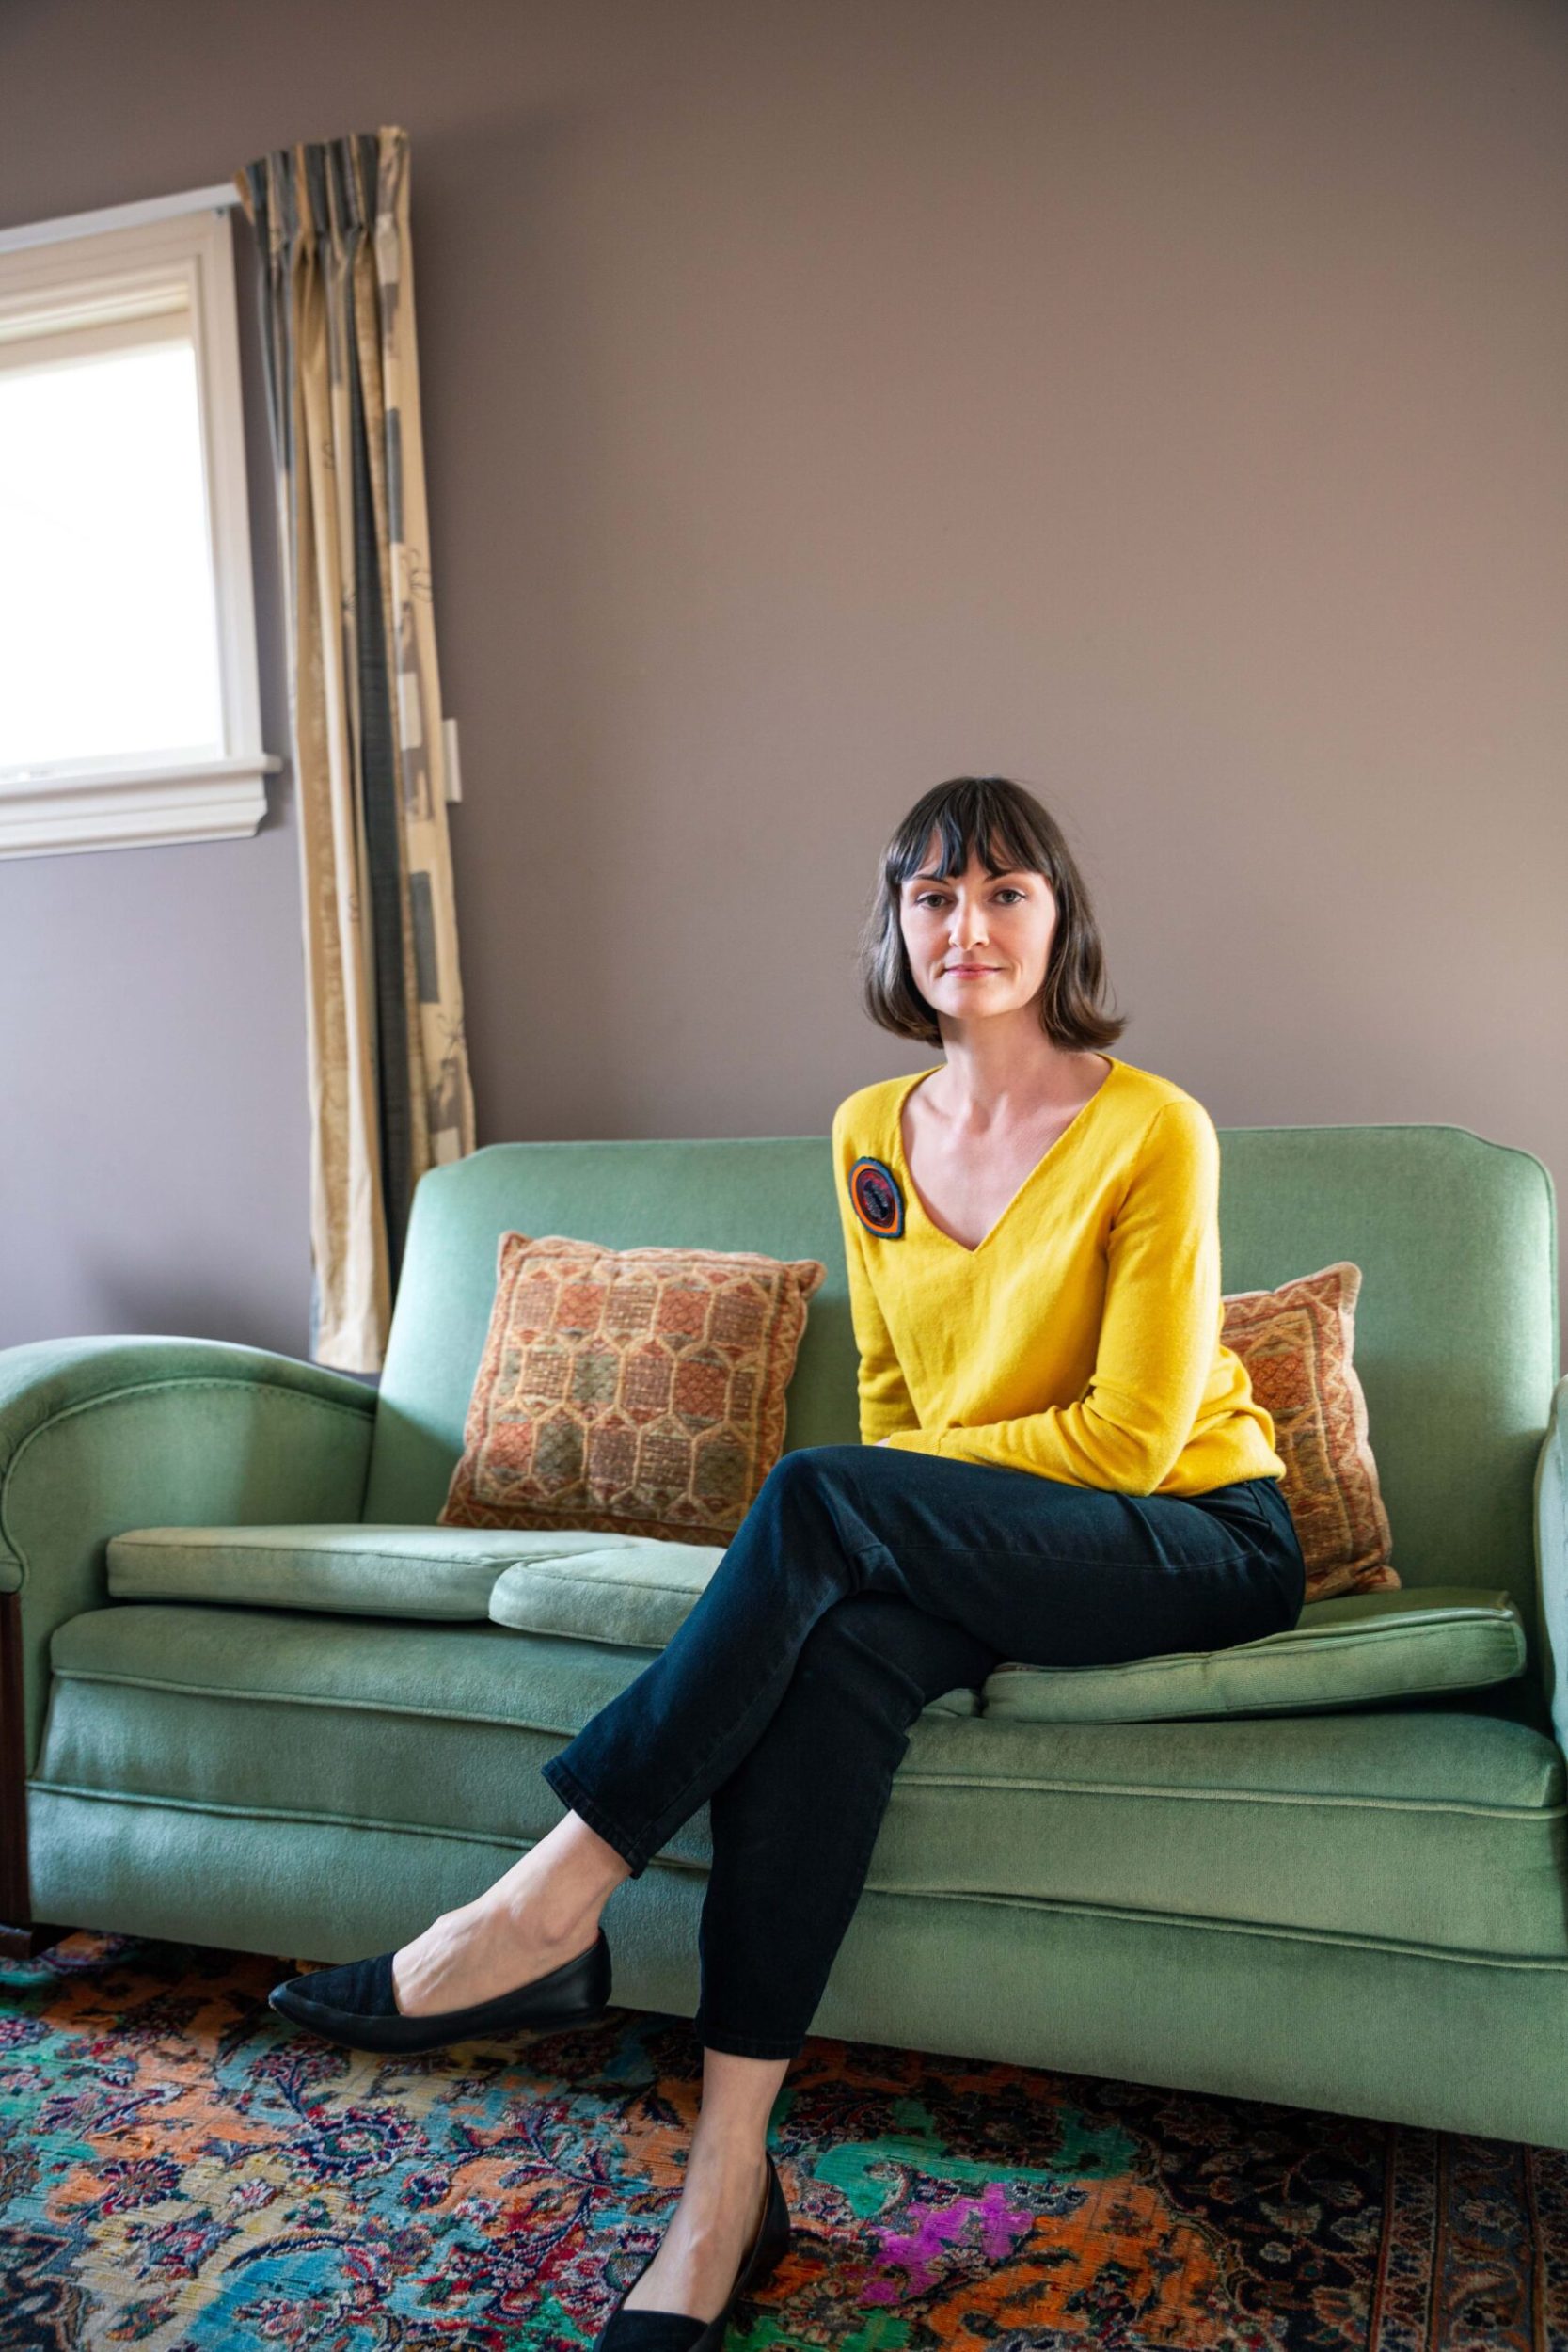 Octavia Cook sitting on a green retro couch wearing a yellow top with a colourful pin